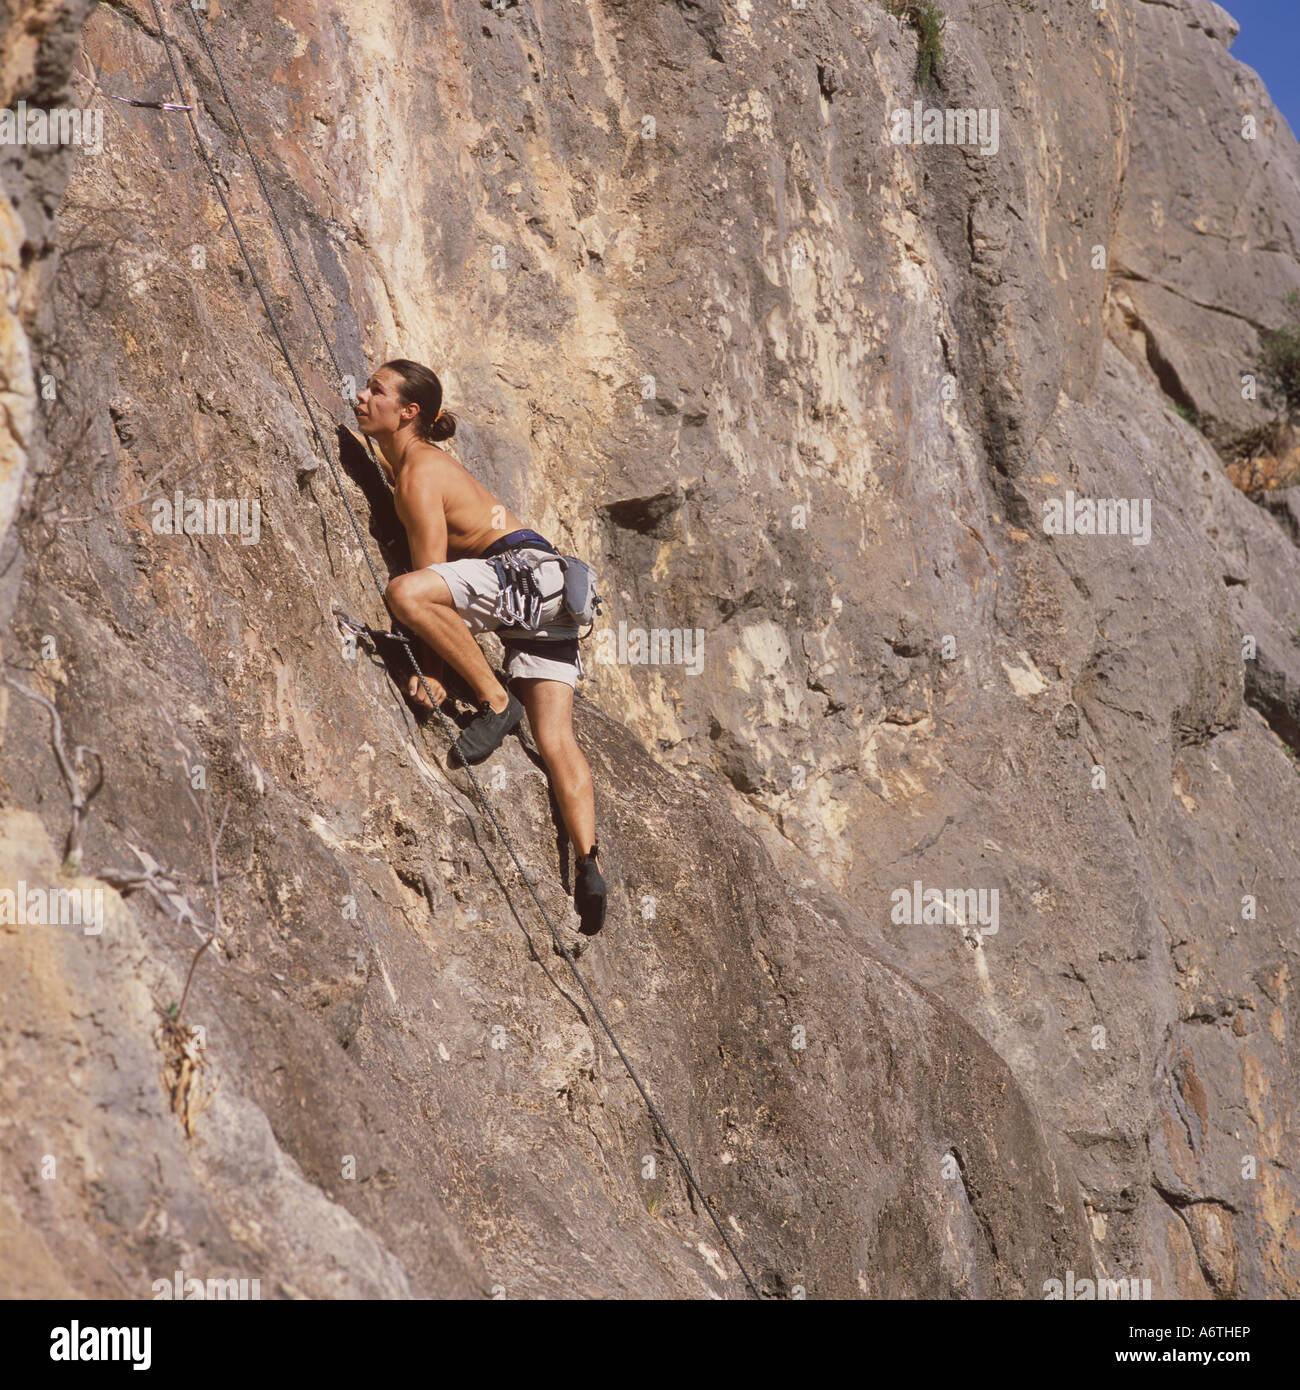 Rock climber ascending a rock face in South West Mallorca, Balearic Islands, Spain. 8th October 2005. Stock Photo